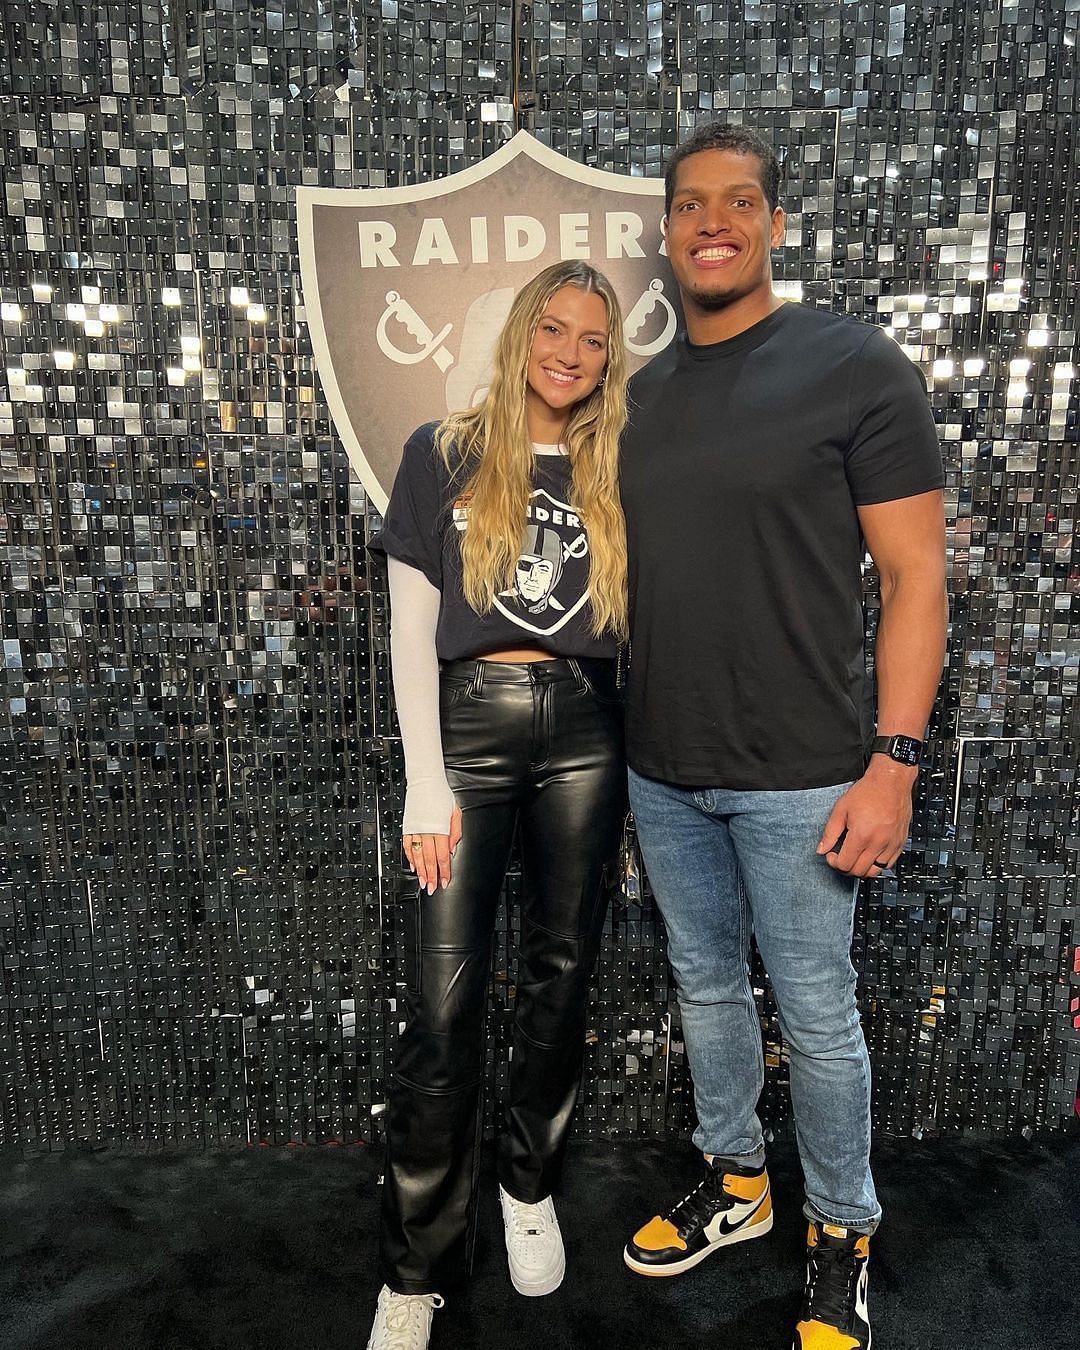 Allison and Raiders star Isaac Rochell at the Allegiant Stadium (Image credit: @allisonkuch IG)